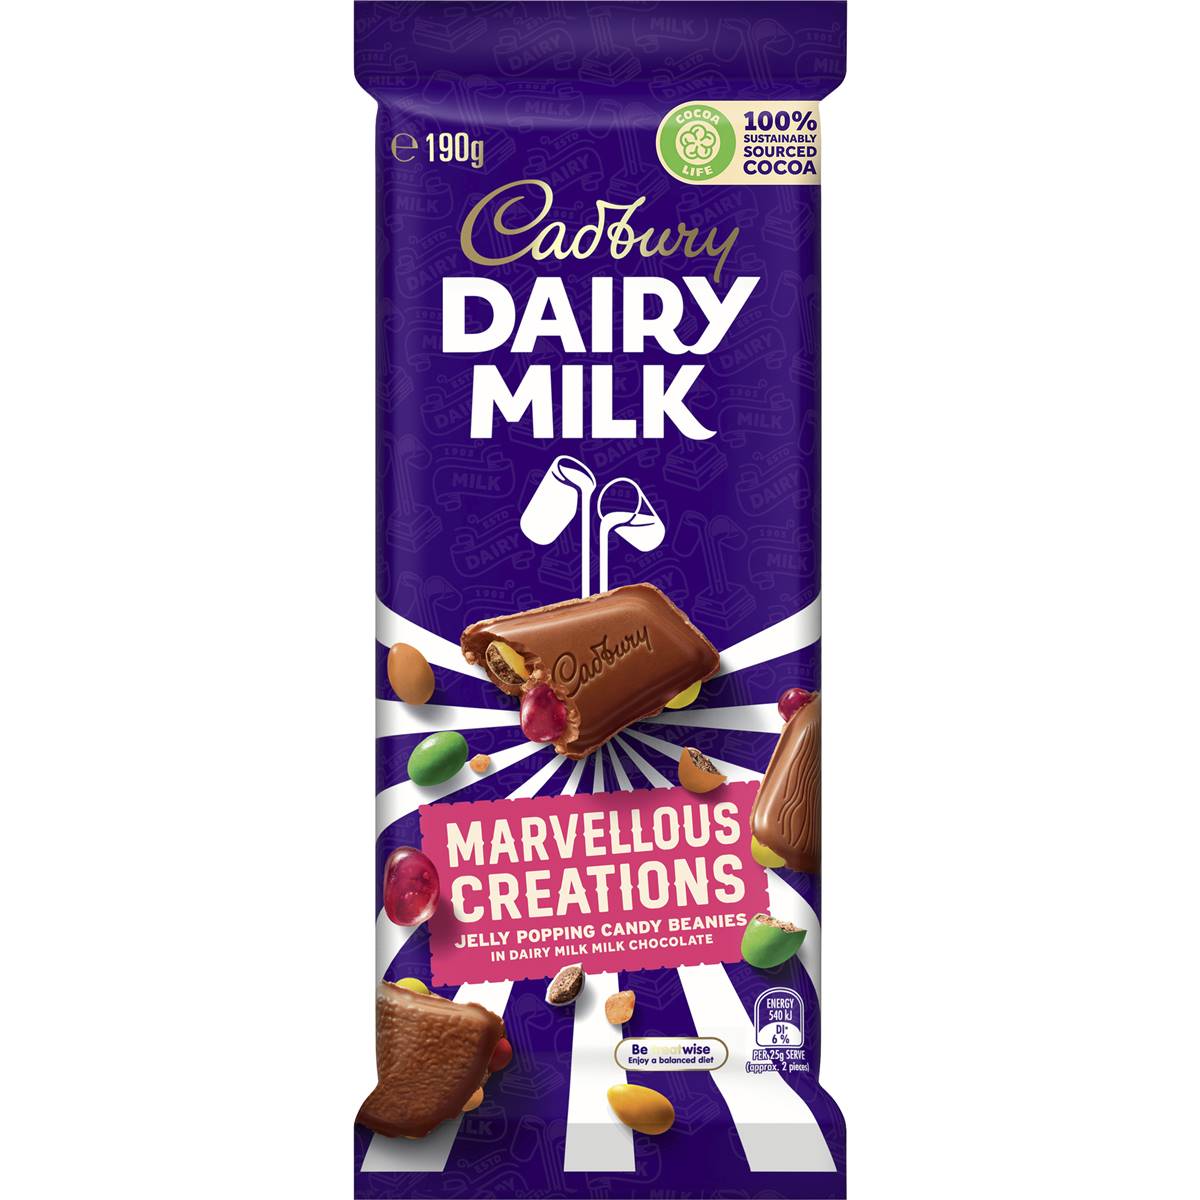 Calories in Cadbury Dairy Milk Marvellous Creations Jelly Popping Candy